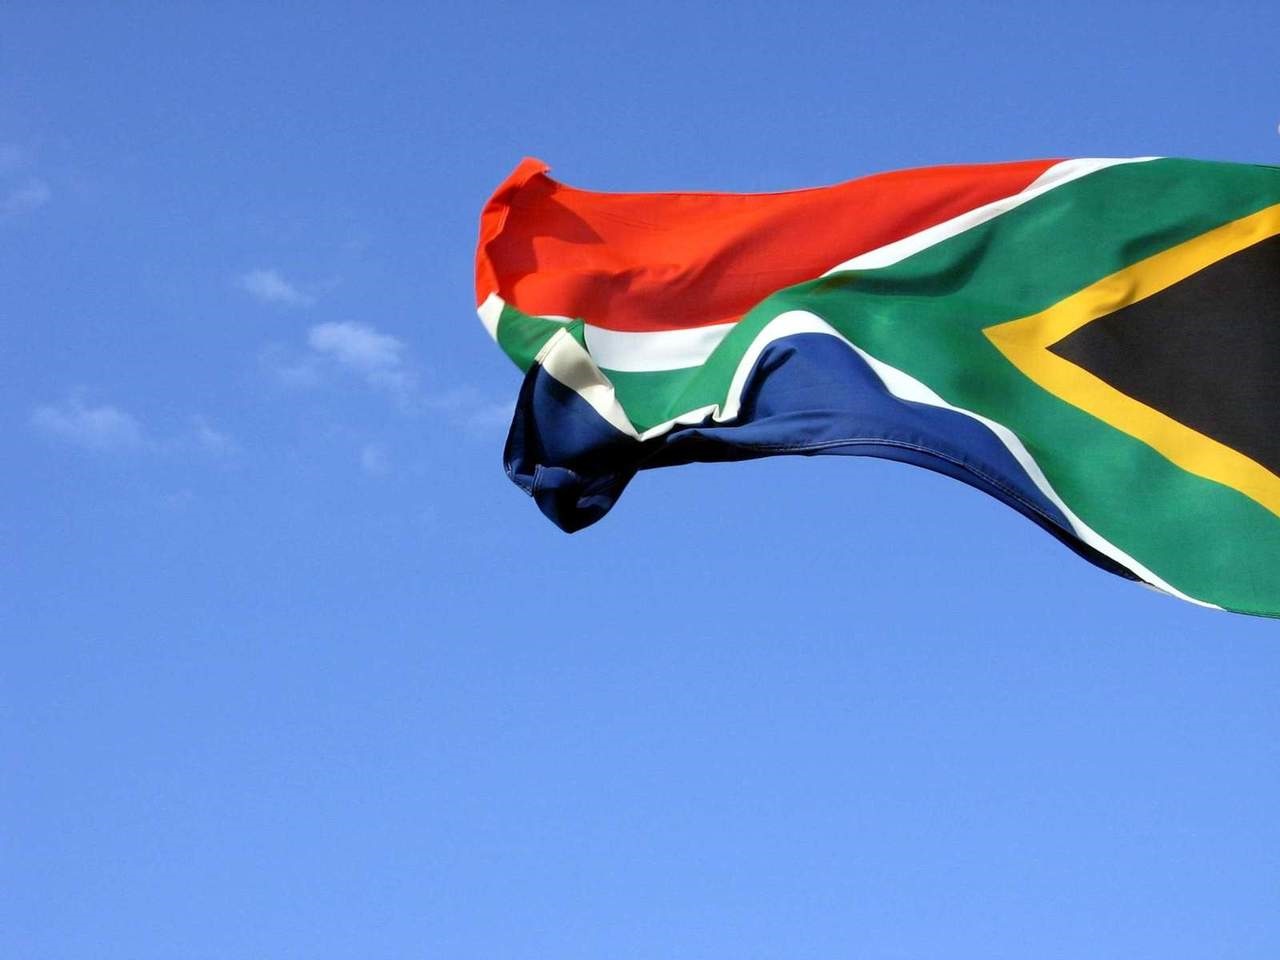 Binary options tax south africa